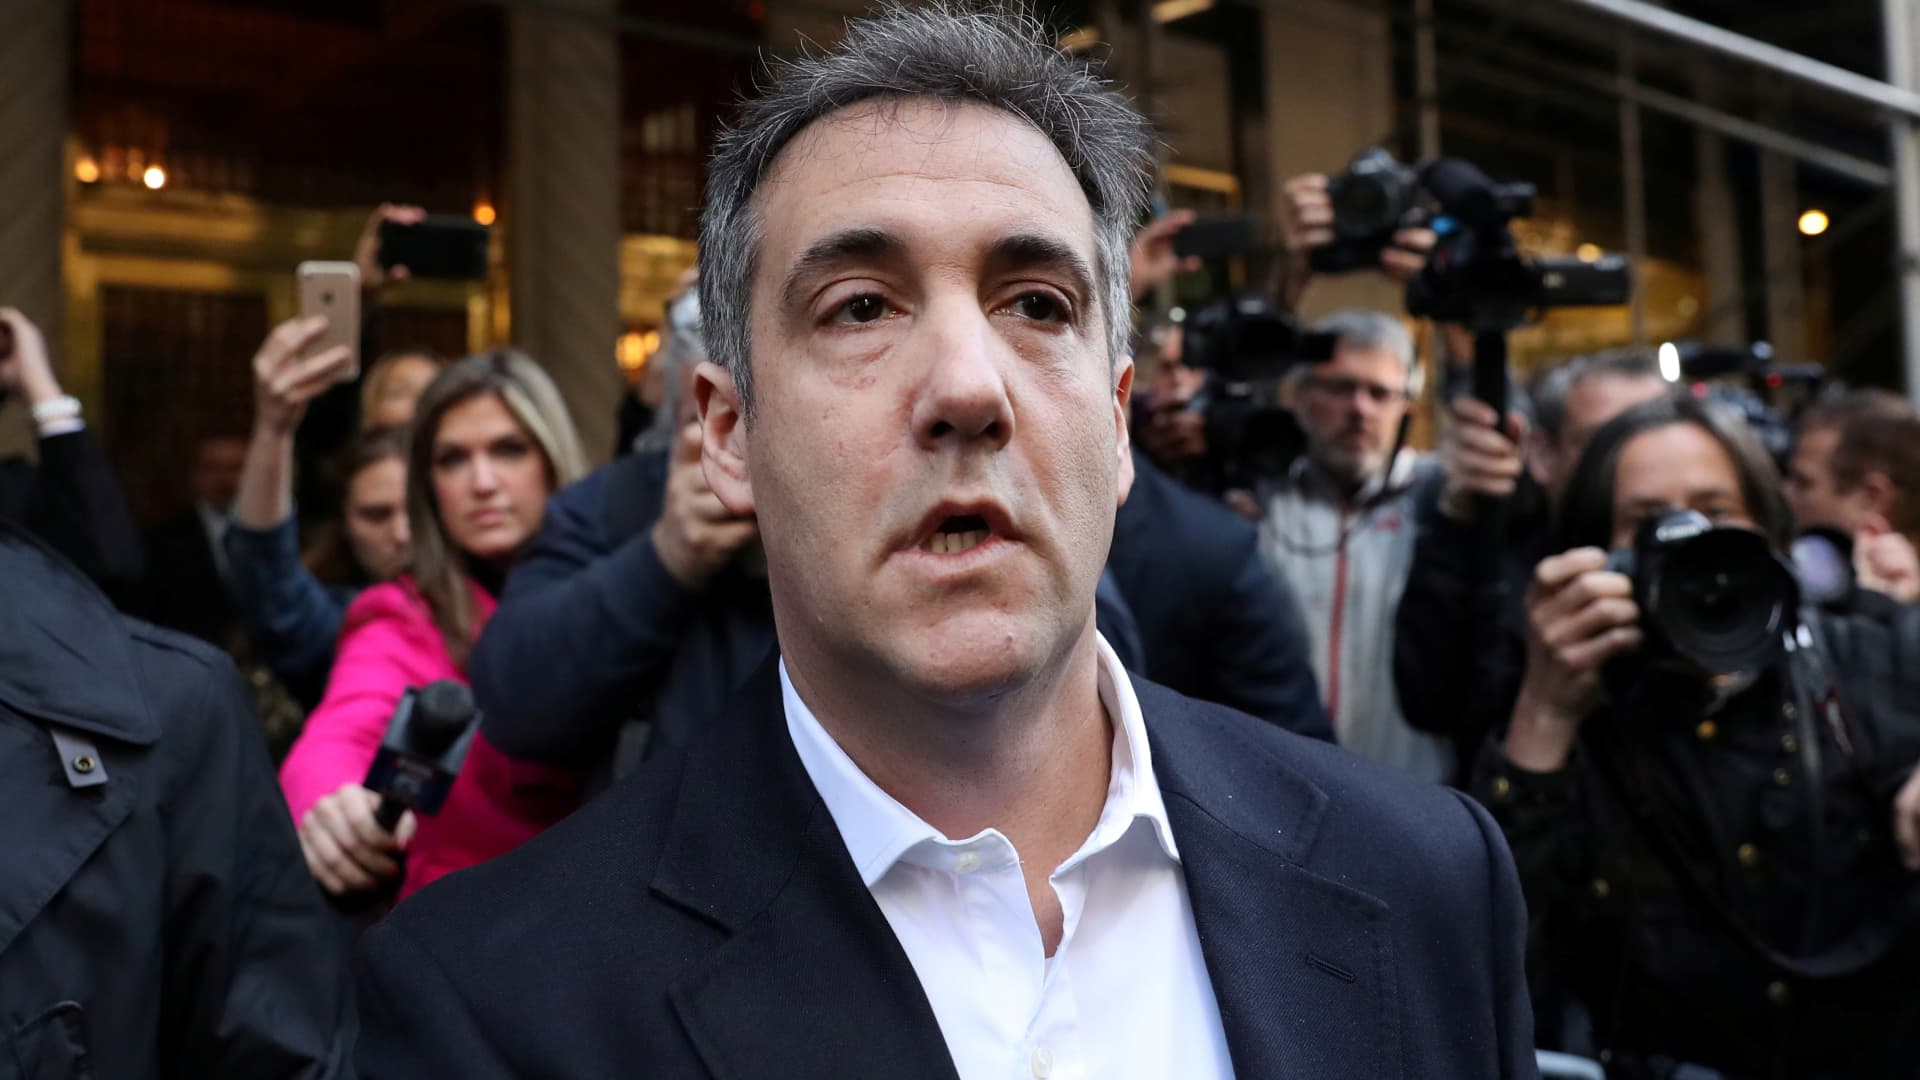 Michael Cohen, President Donald Trump's former lawyer, leaves his apartment to report to prison in Manhattan, New York, May 6, 2019.